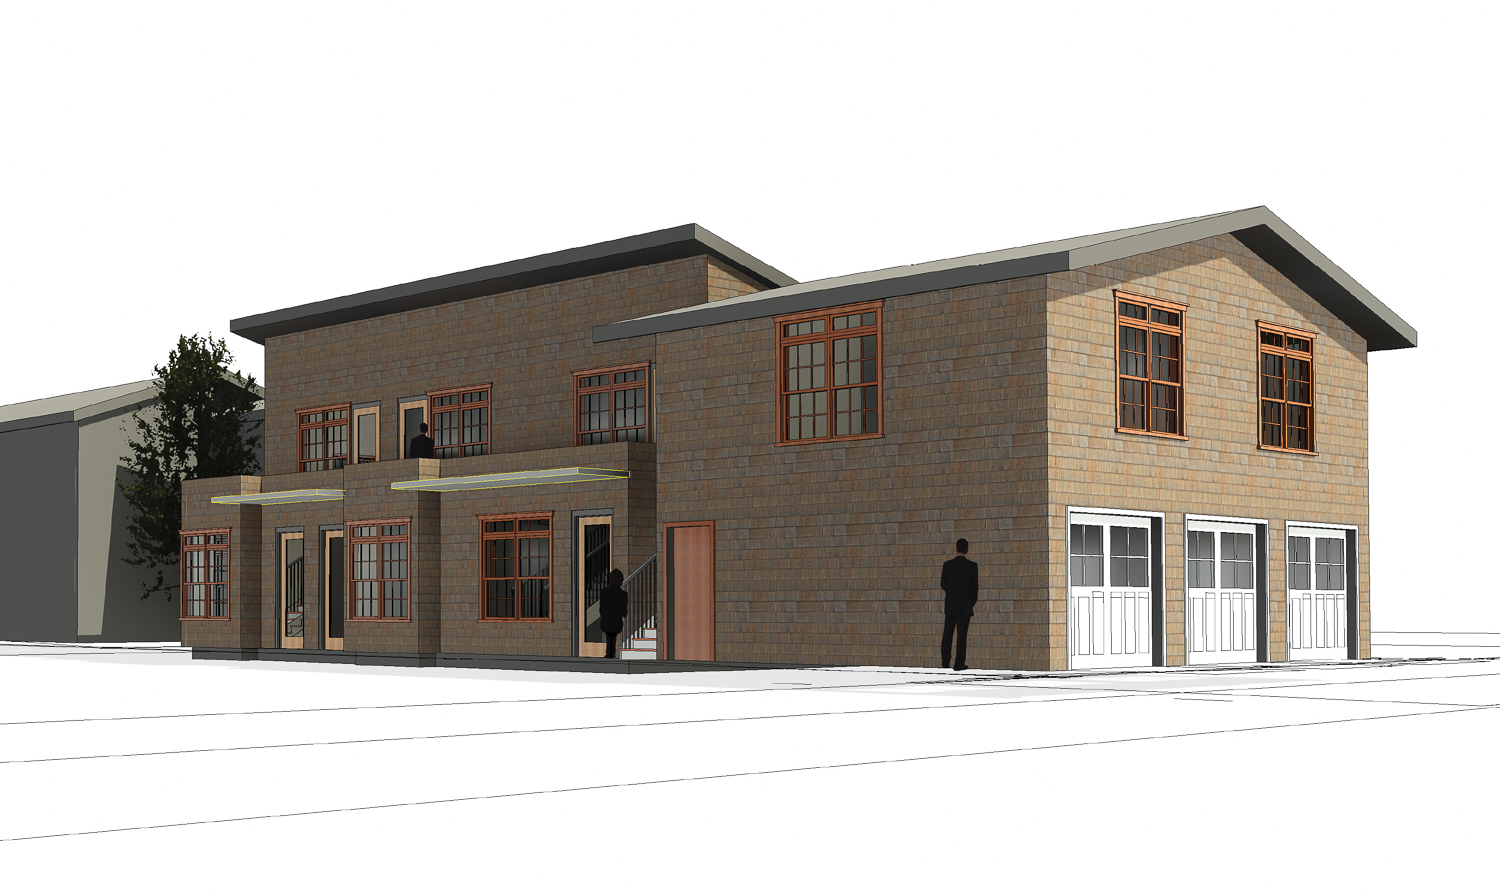 The Historic Alley Lofts and Studios, rendering courtesy the Warren Trust